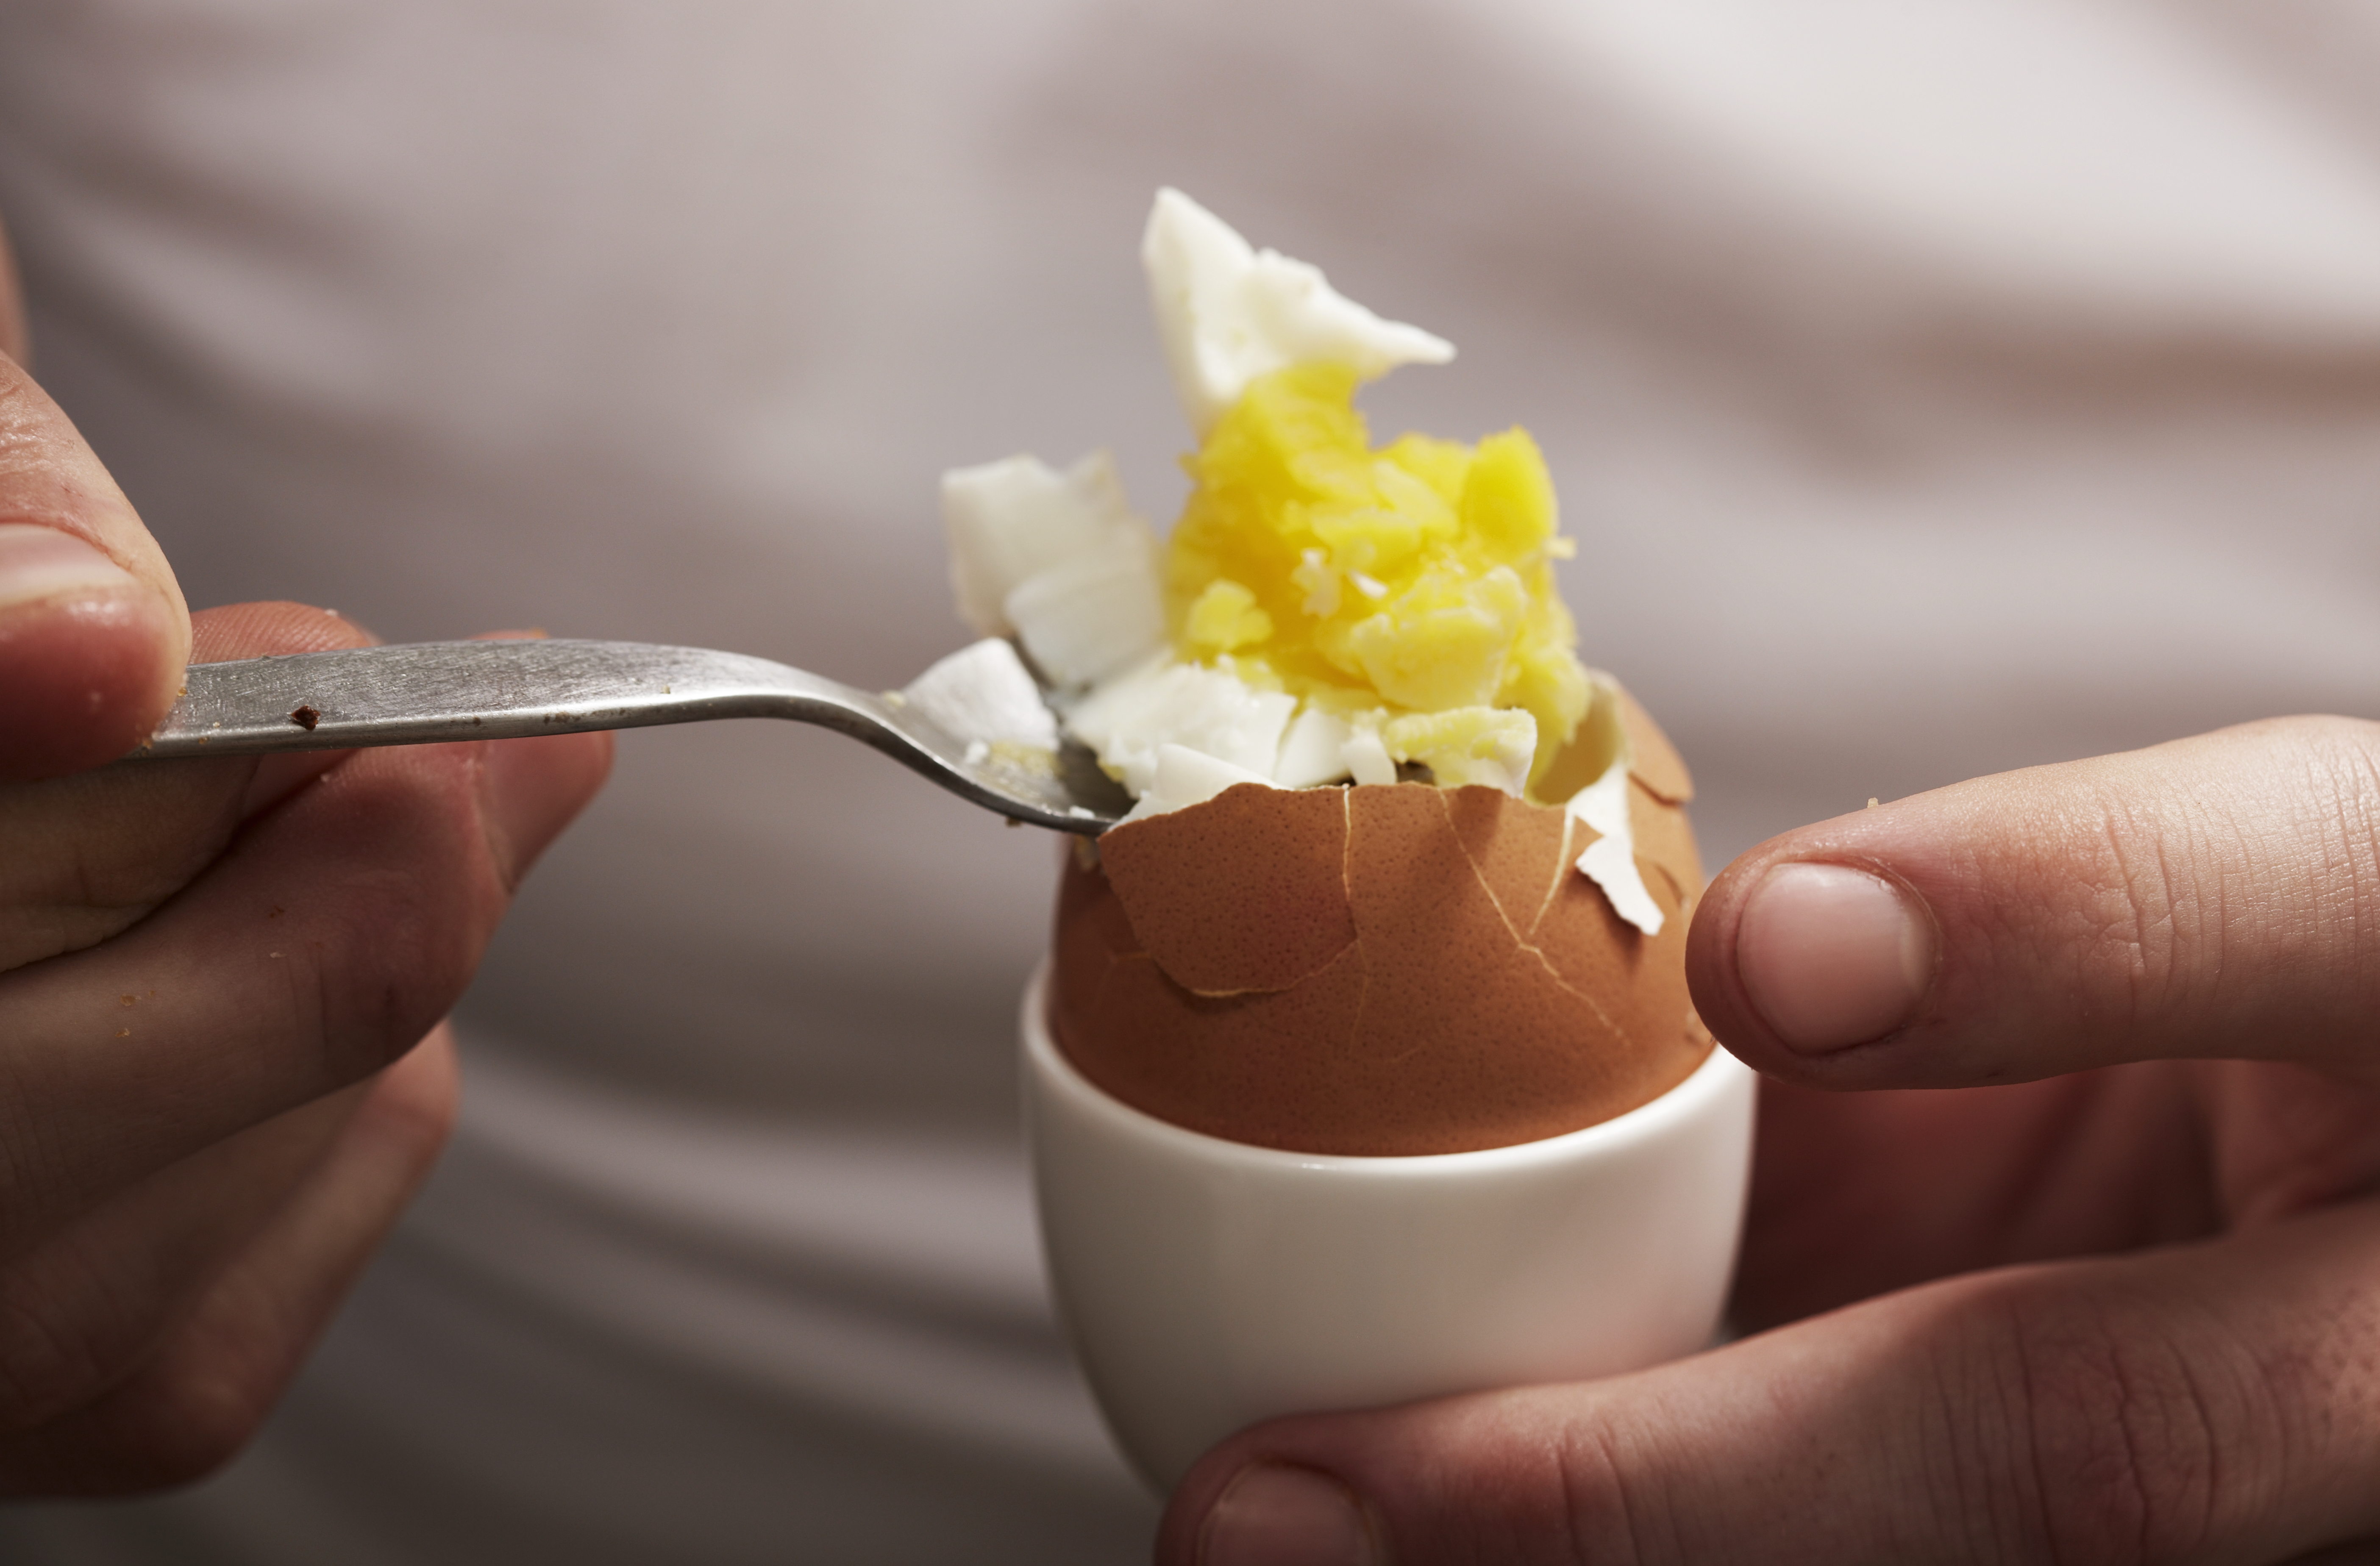 Close up image of a person using a fork to scoop out the insides of a hard-boiled egg.